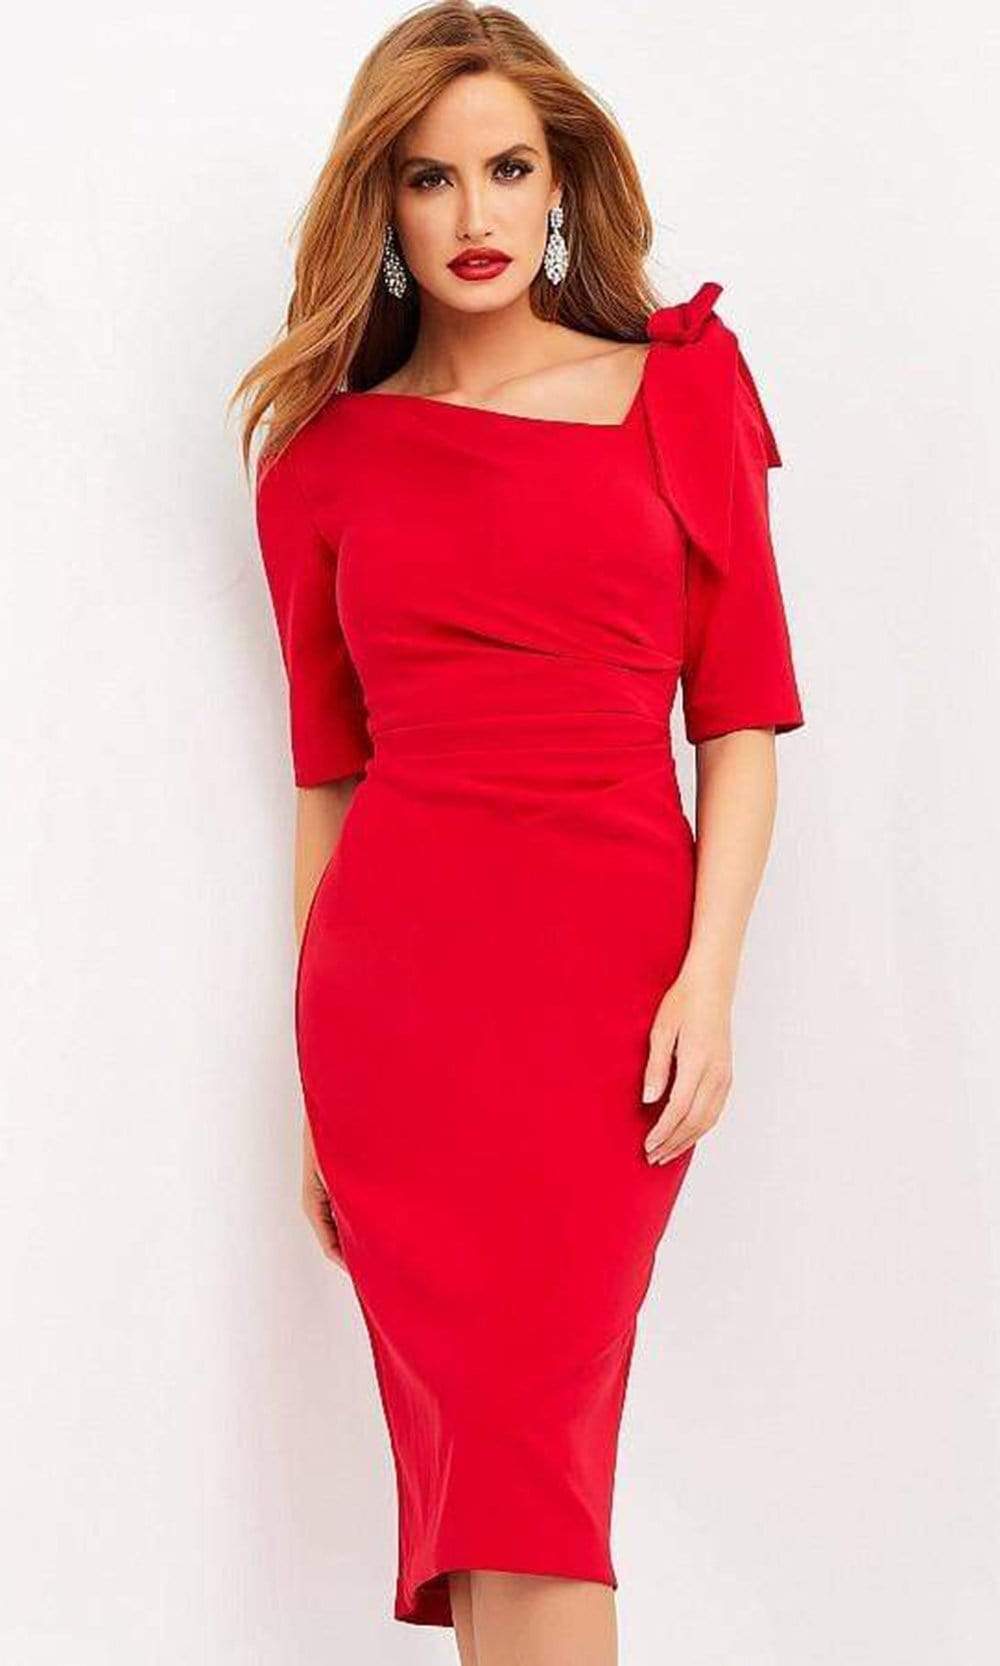 Jovani - 04281 Asymmetric Neck Fitted Knee Length Dress Special Occasion Dress 00 / Red